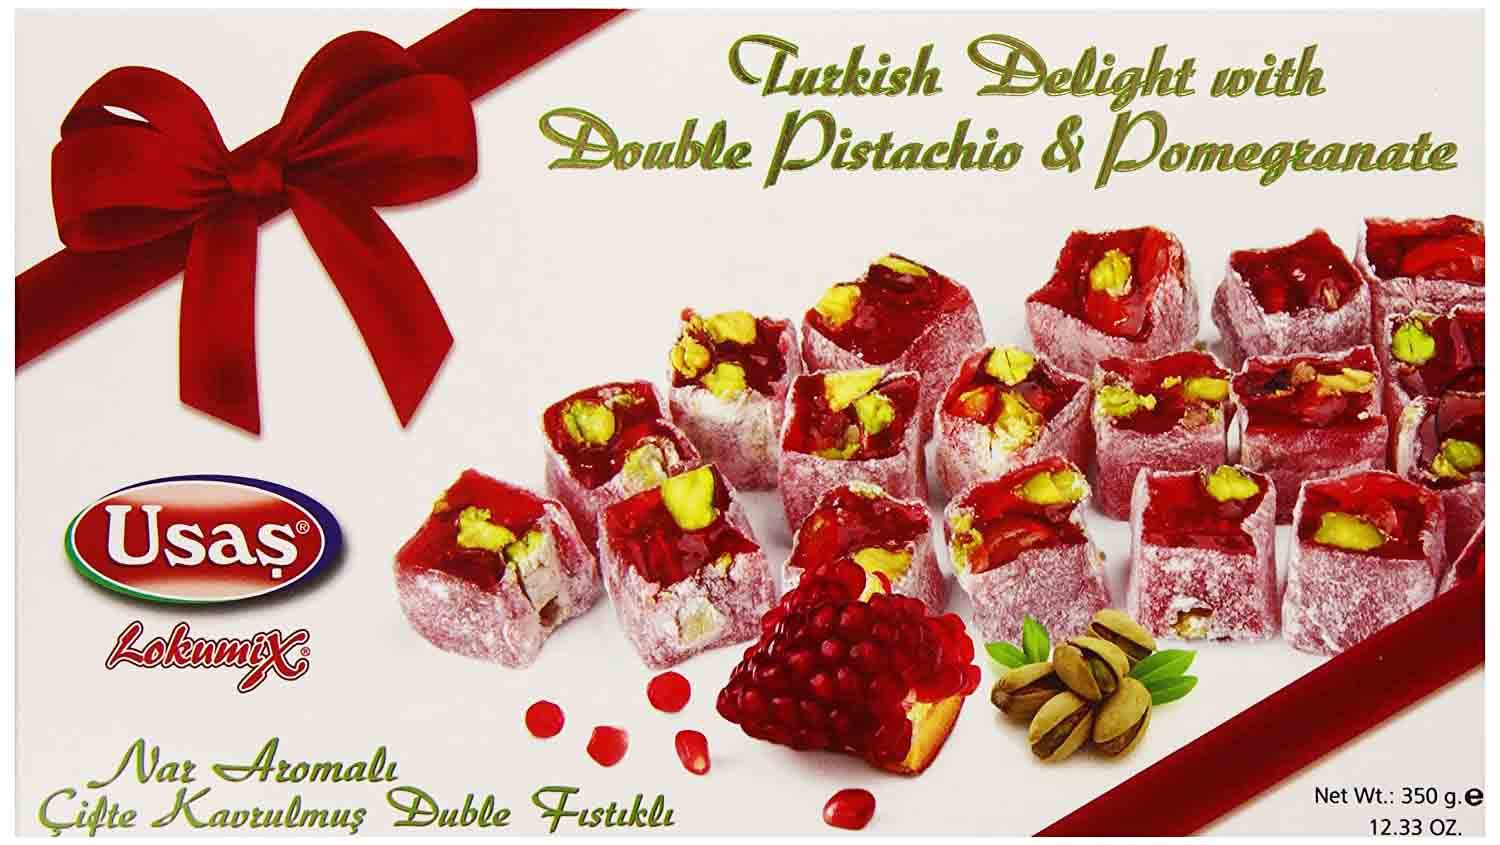 USAS Turkish Delight with Pistachio and Pomegranate